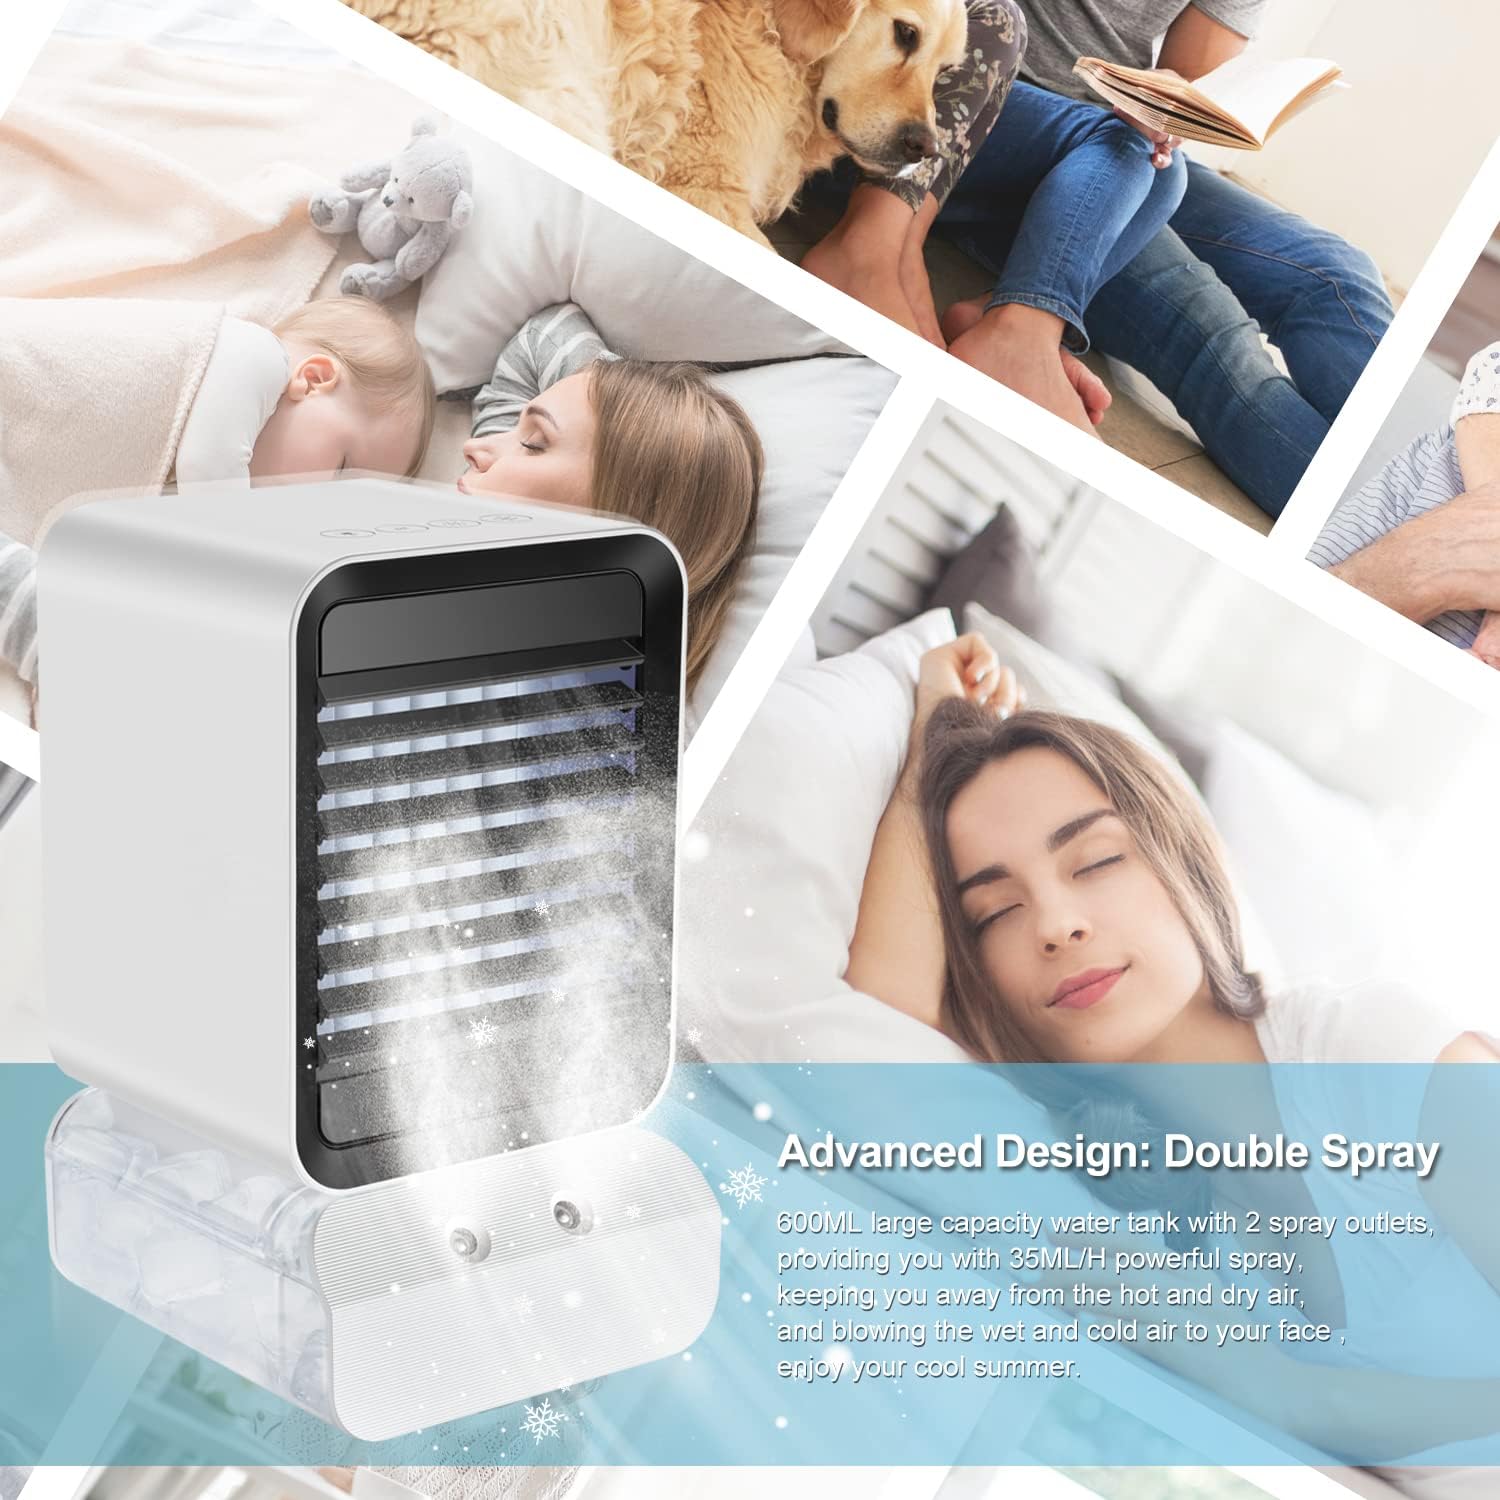 aceyoon Portable Air Conditioner Fan, Evaporative Personal Air Cooler for Small Space, Desktop Mini USB Cooling Fan Humidifier